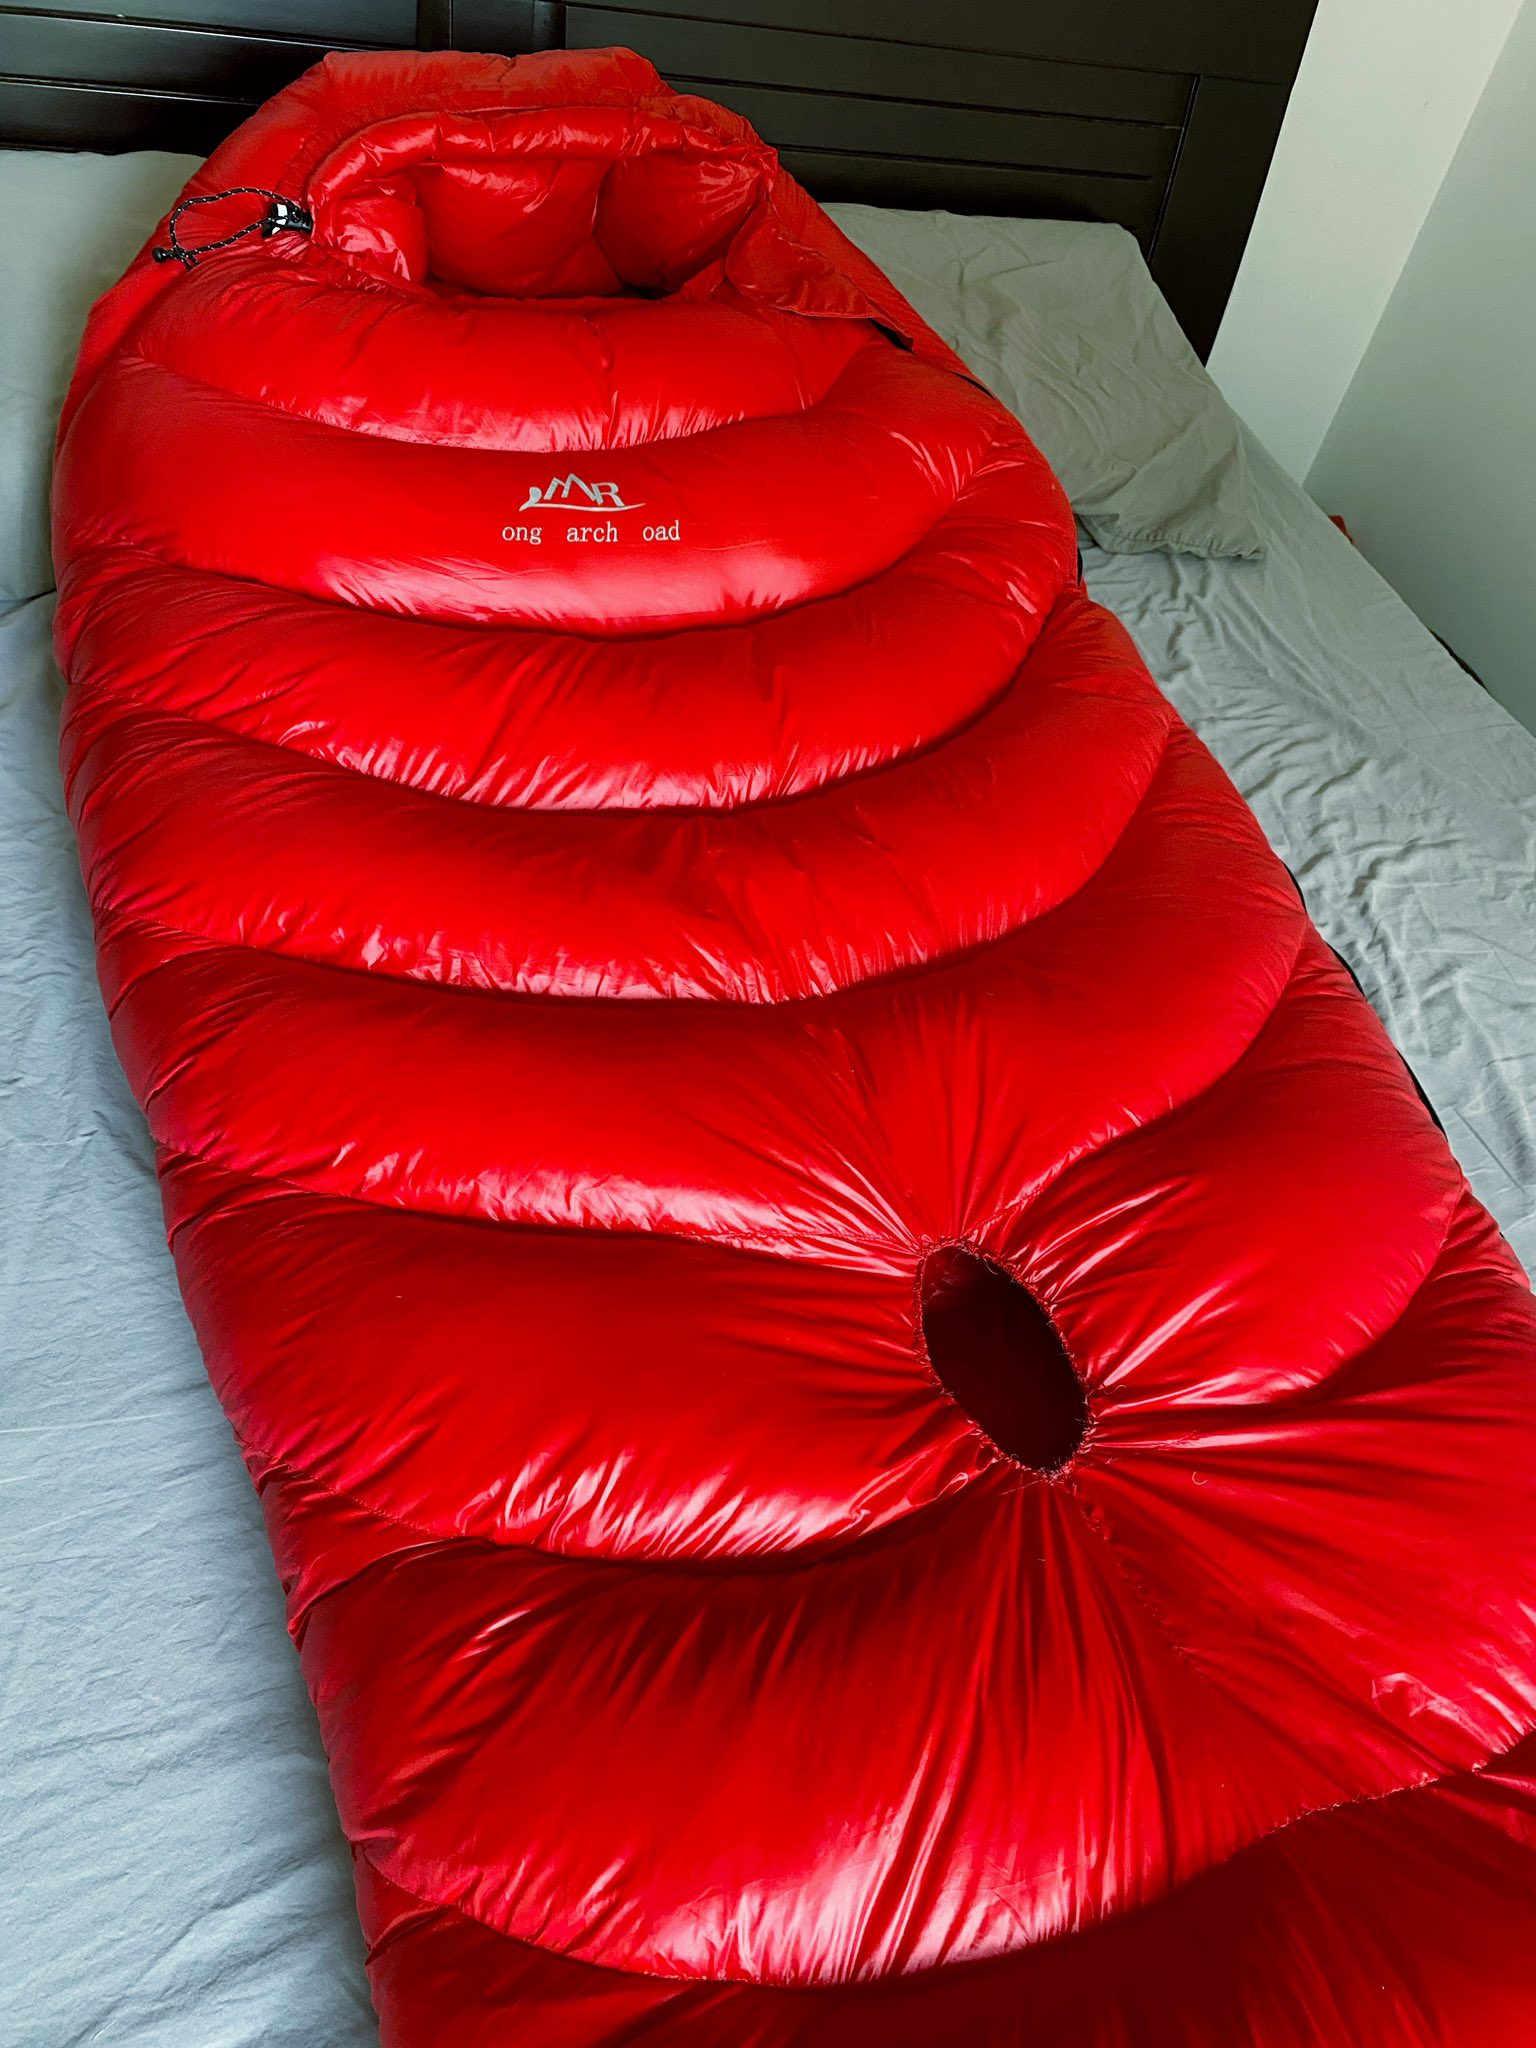 puffygear on Twitter: "Bondage sleeping bag modification complete. Ready  for some intense edging sessions. https://t.co/xLaNw6RLc4" / Twitter